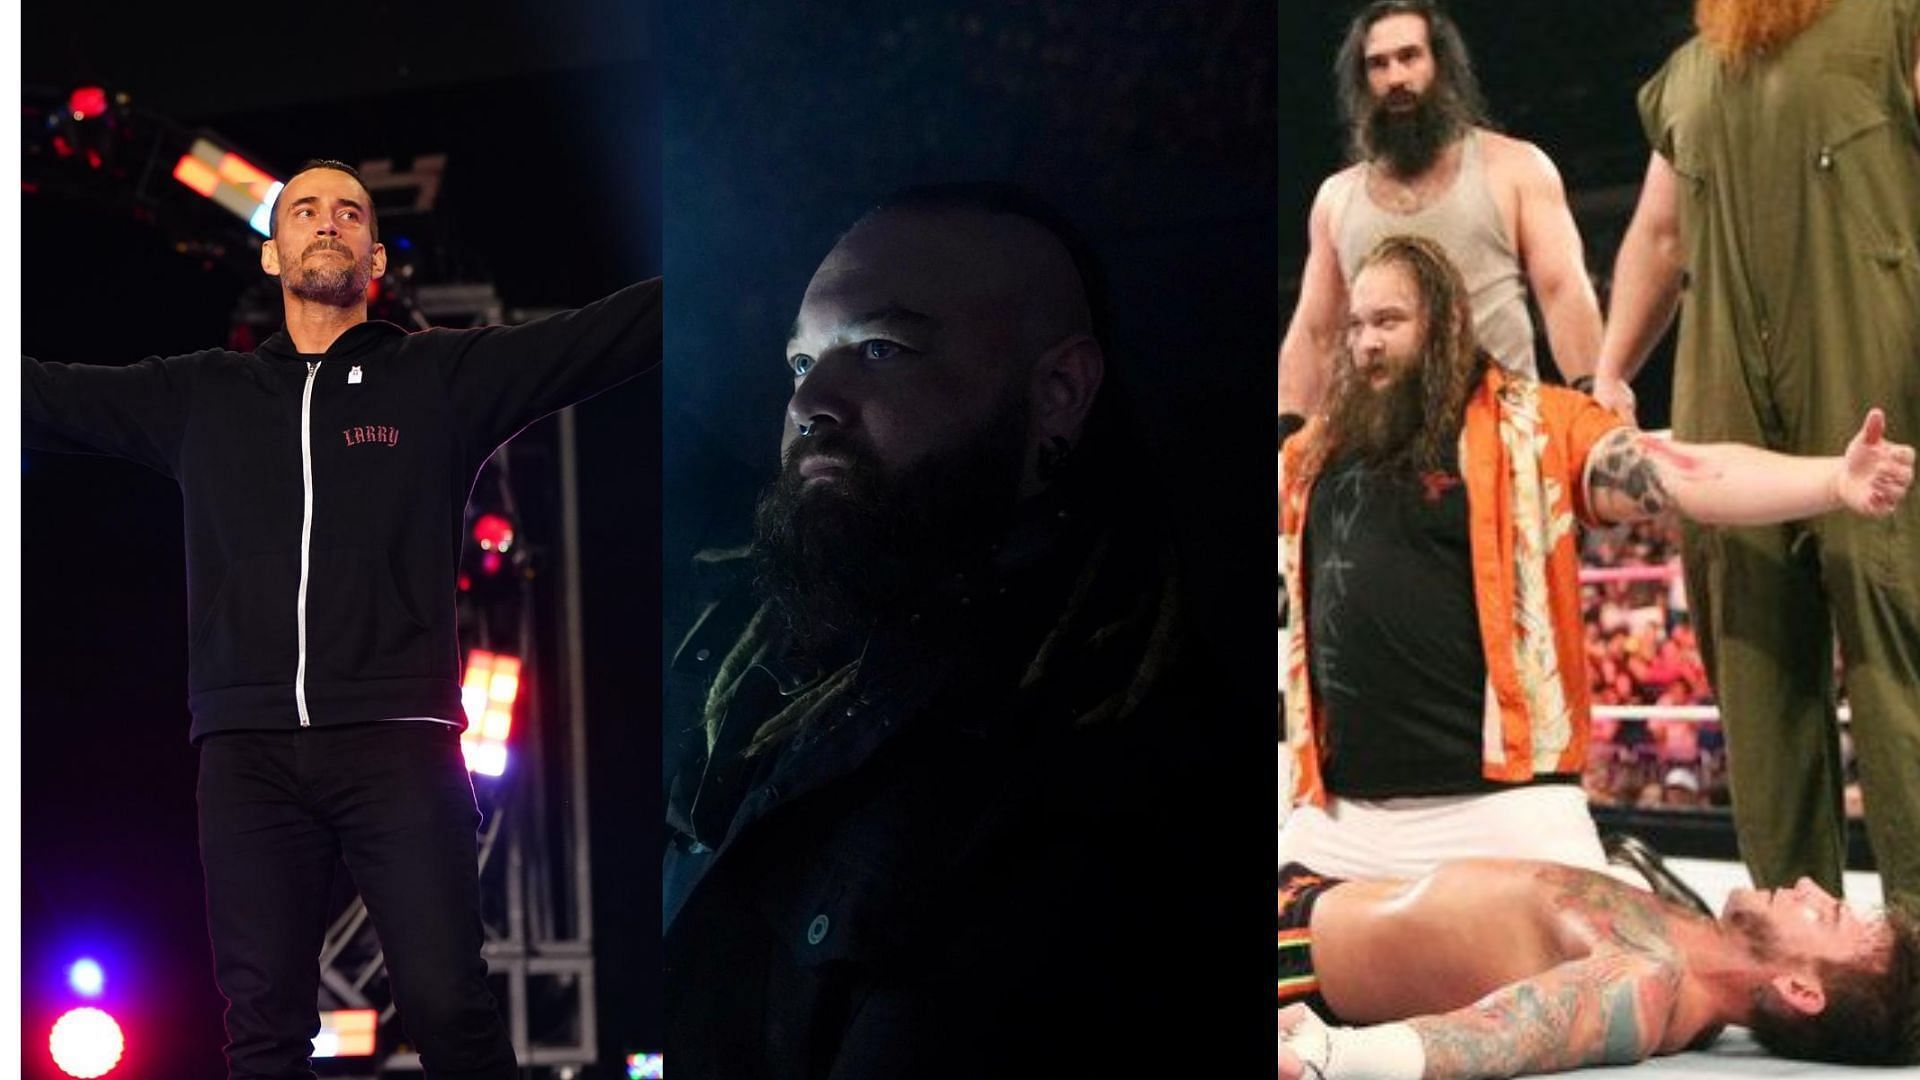 Fans on social media have started to compare CM Punk and Bray Wyatt